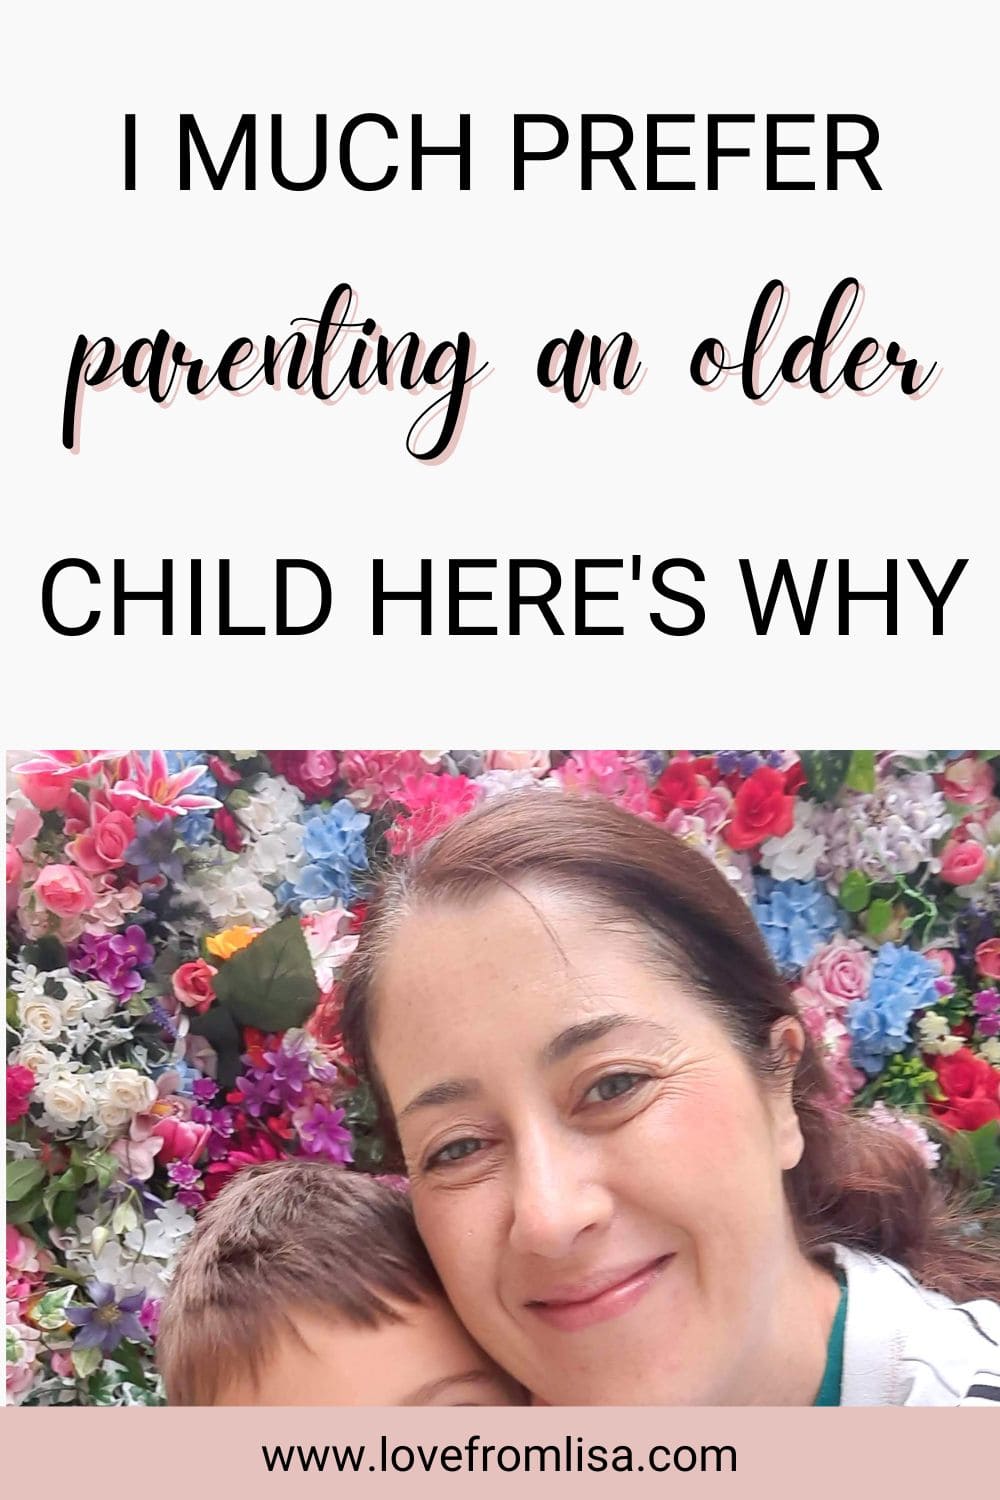 I much prefer parenting an older child, and here’s why Pinterest